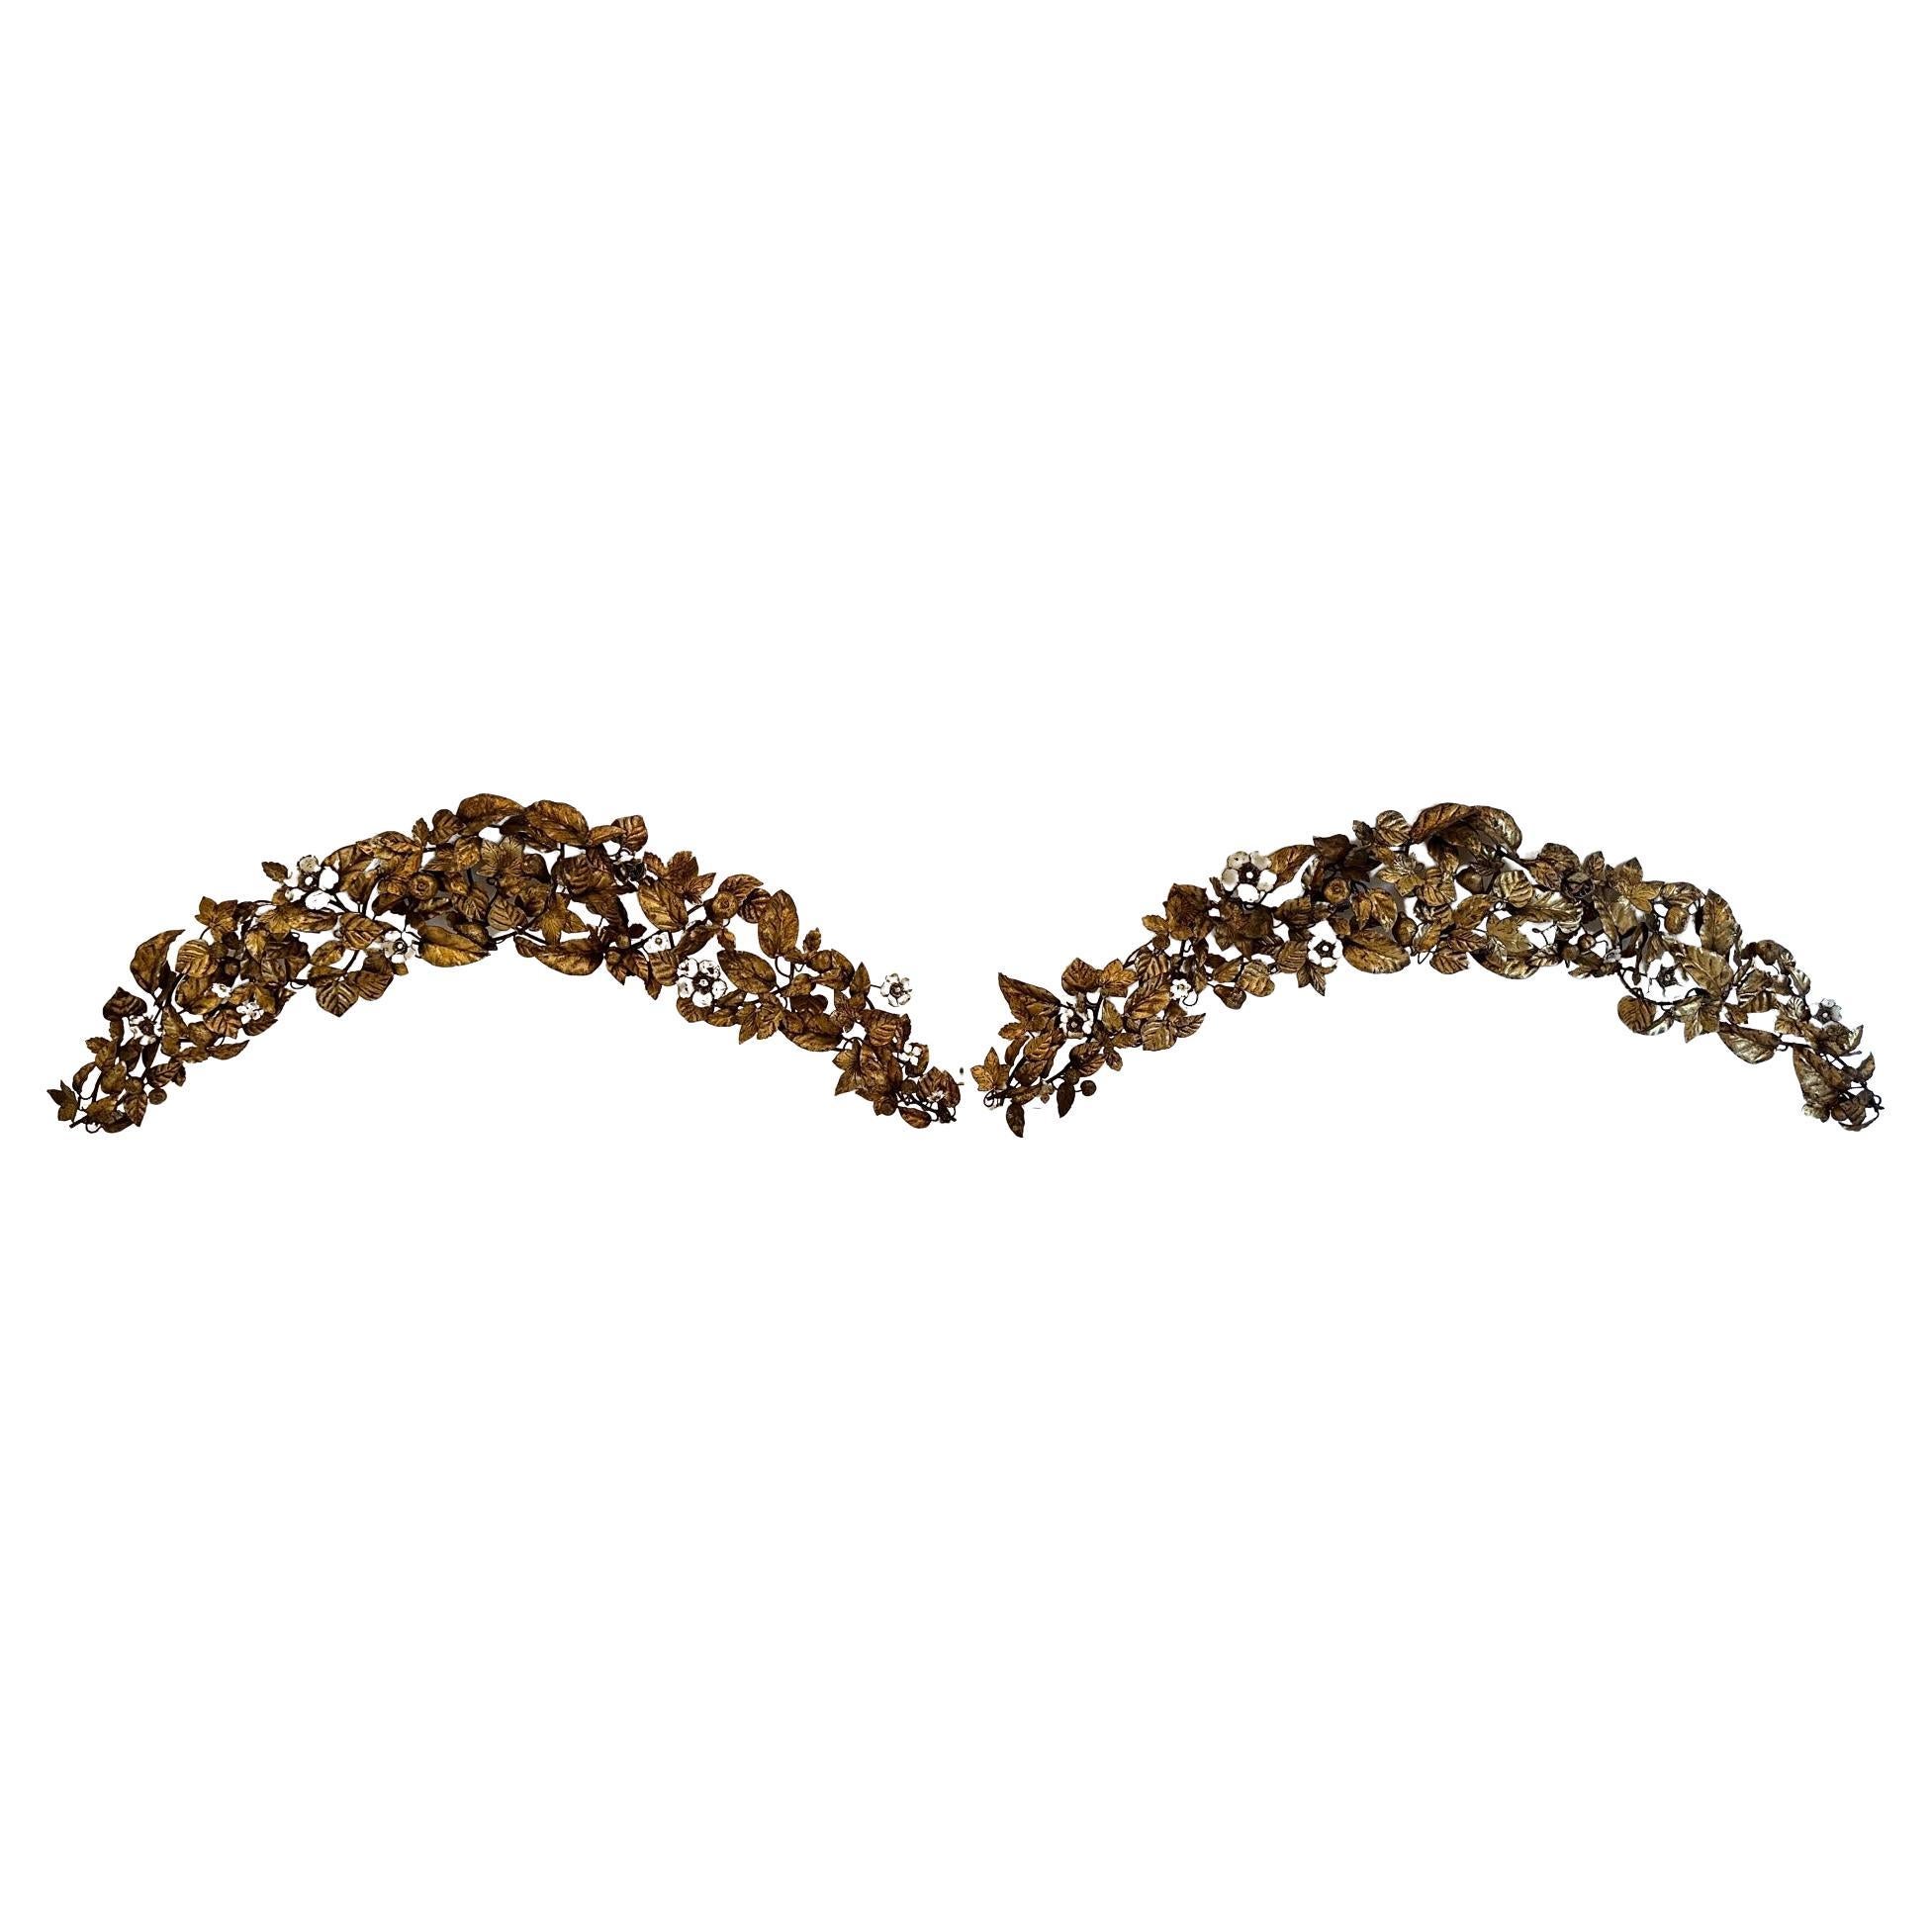 Impressive ornate pair of gilt metal tole boomerang or crescent shaped wall sculptures that make fabulous arches above windows or adornments over doorways. Beautiful aged display of leaves and flowers with 3 dimensionality and wonderful patina.